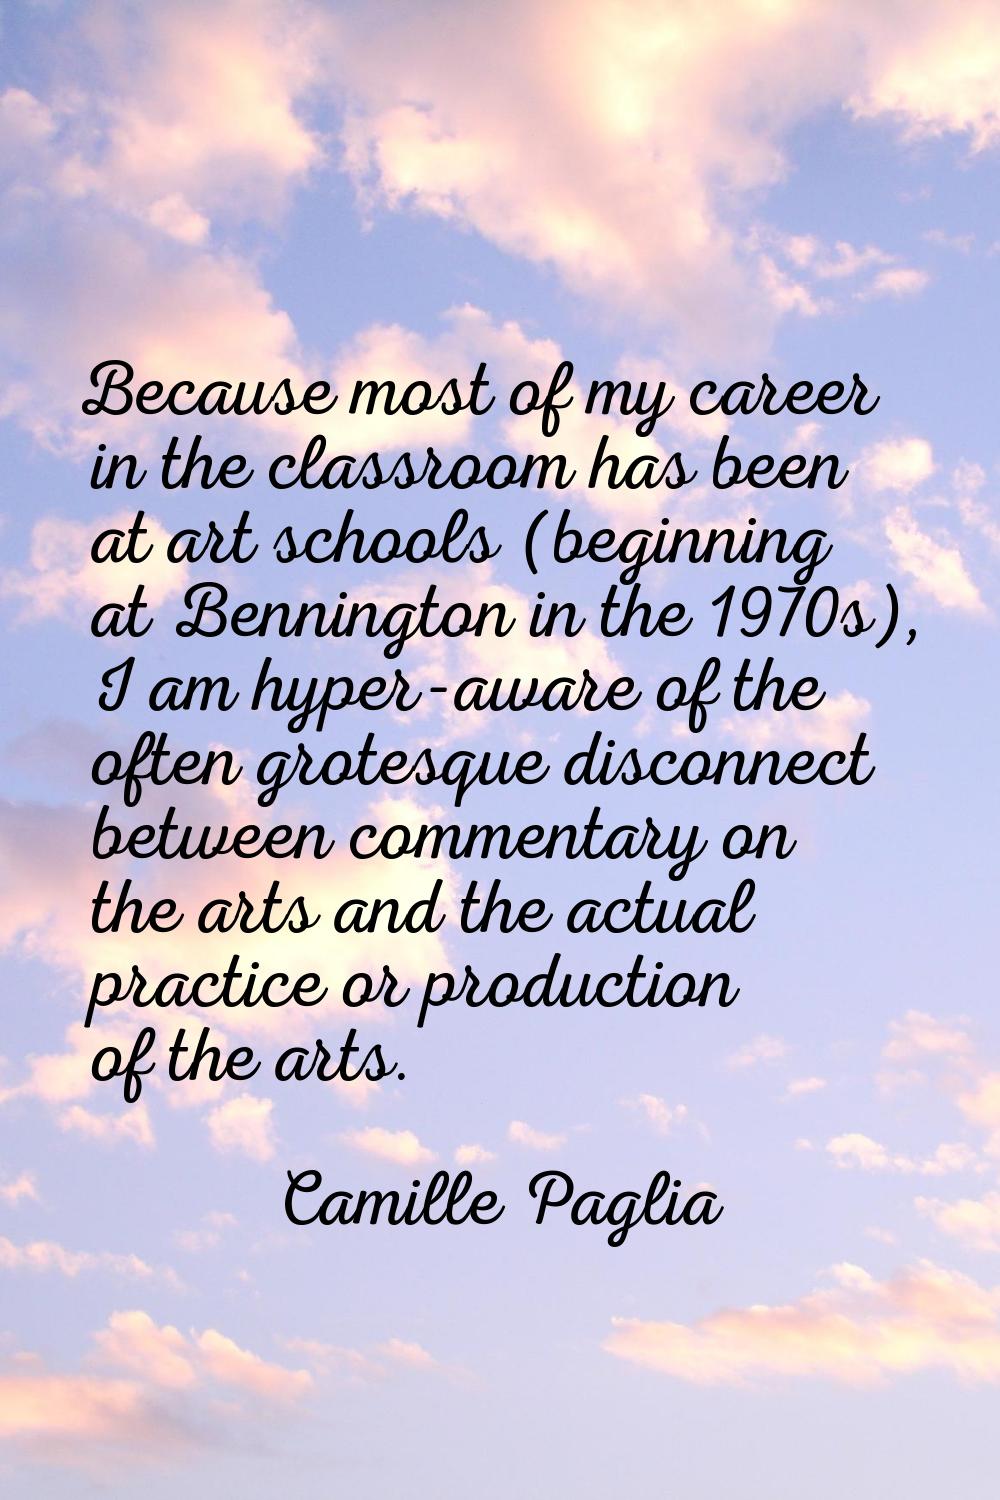 Because most of my career in the classroom has been at art schools (beginning at Bennington in the 